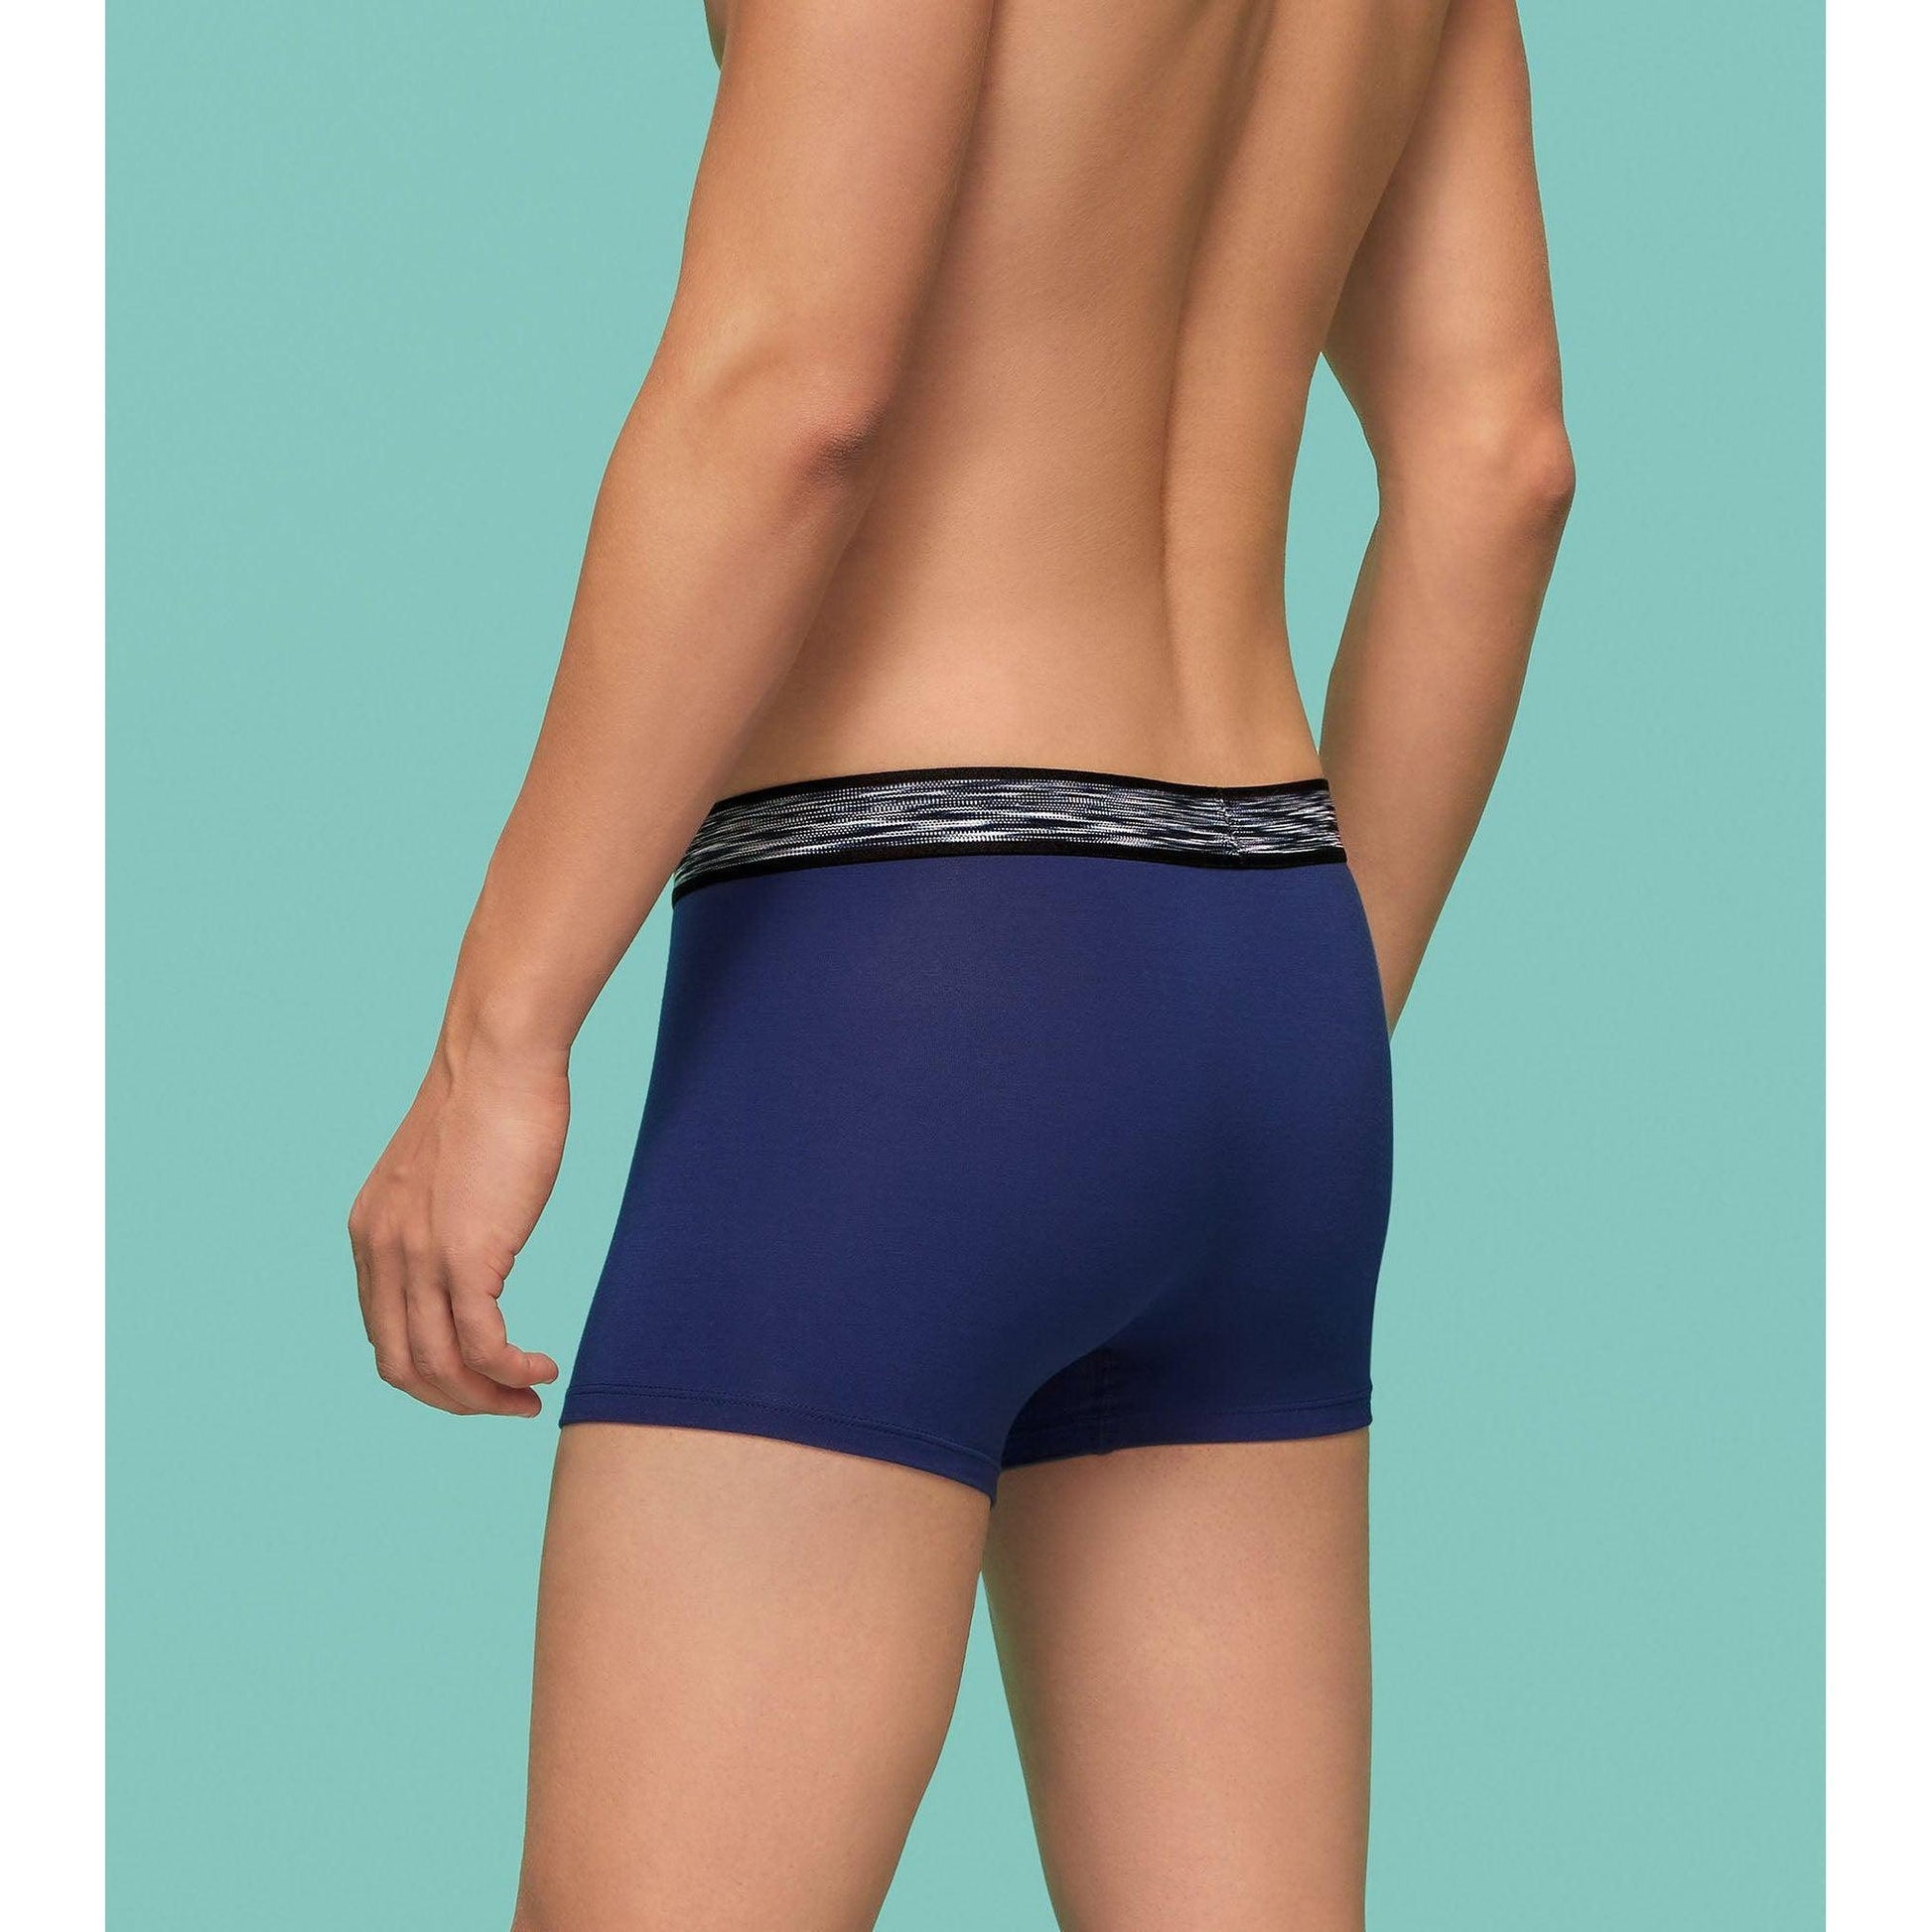 PACK OF 2 TENCEL™ TRUNKS- : HUES COLLECTION - CLASSIC BLUE / TWILIGHT BLUE